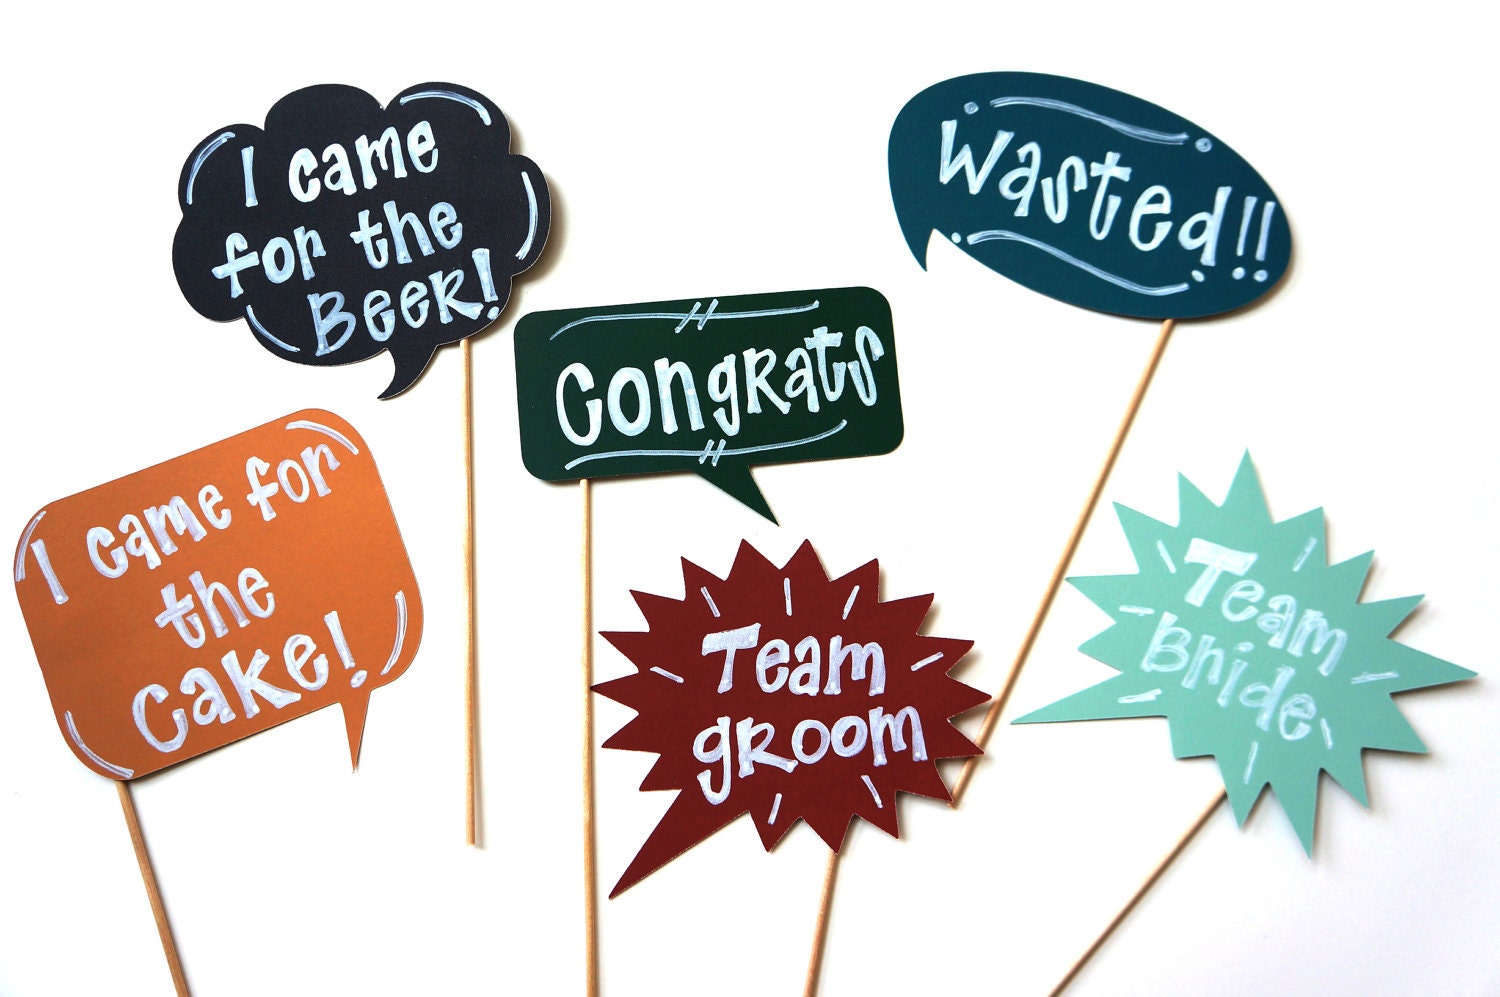 Chalkboard Photo Booth Props on a stick - Set of 6 Chalk Board Photobooth Props - Fun for Parties, Weddings - Includes Chalk